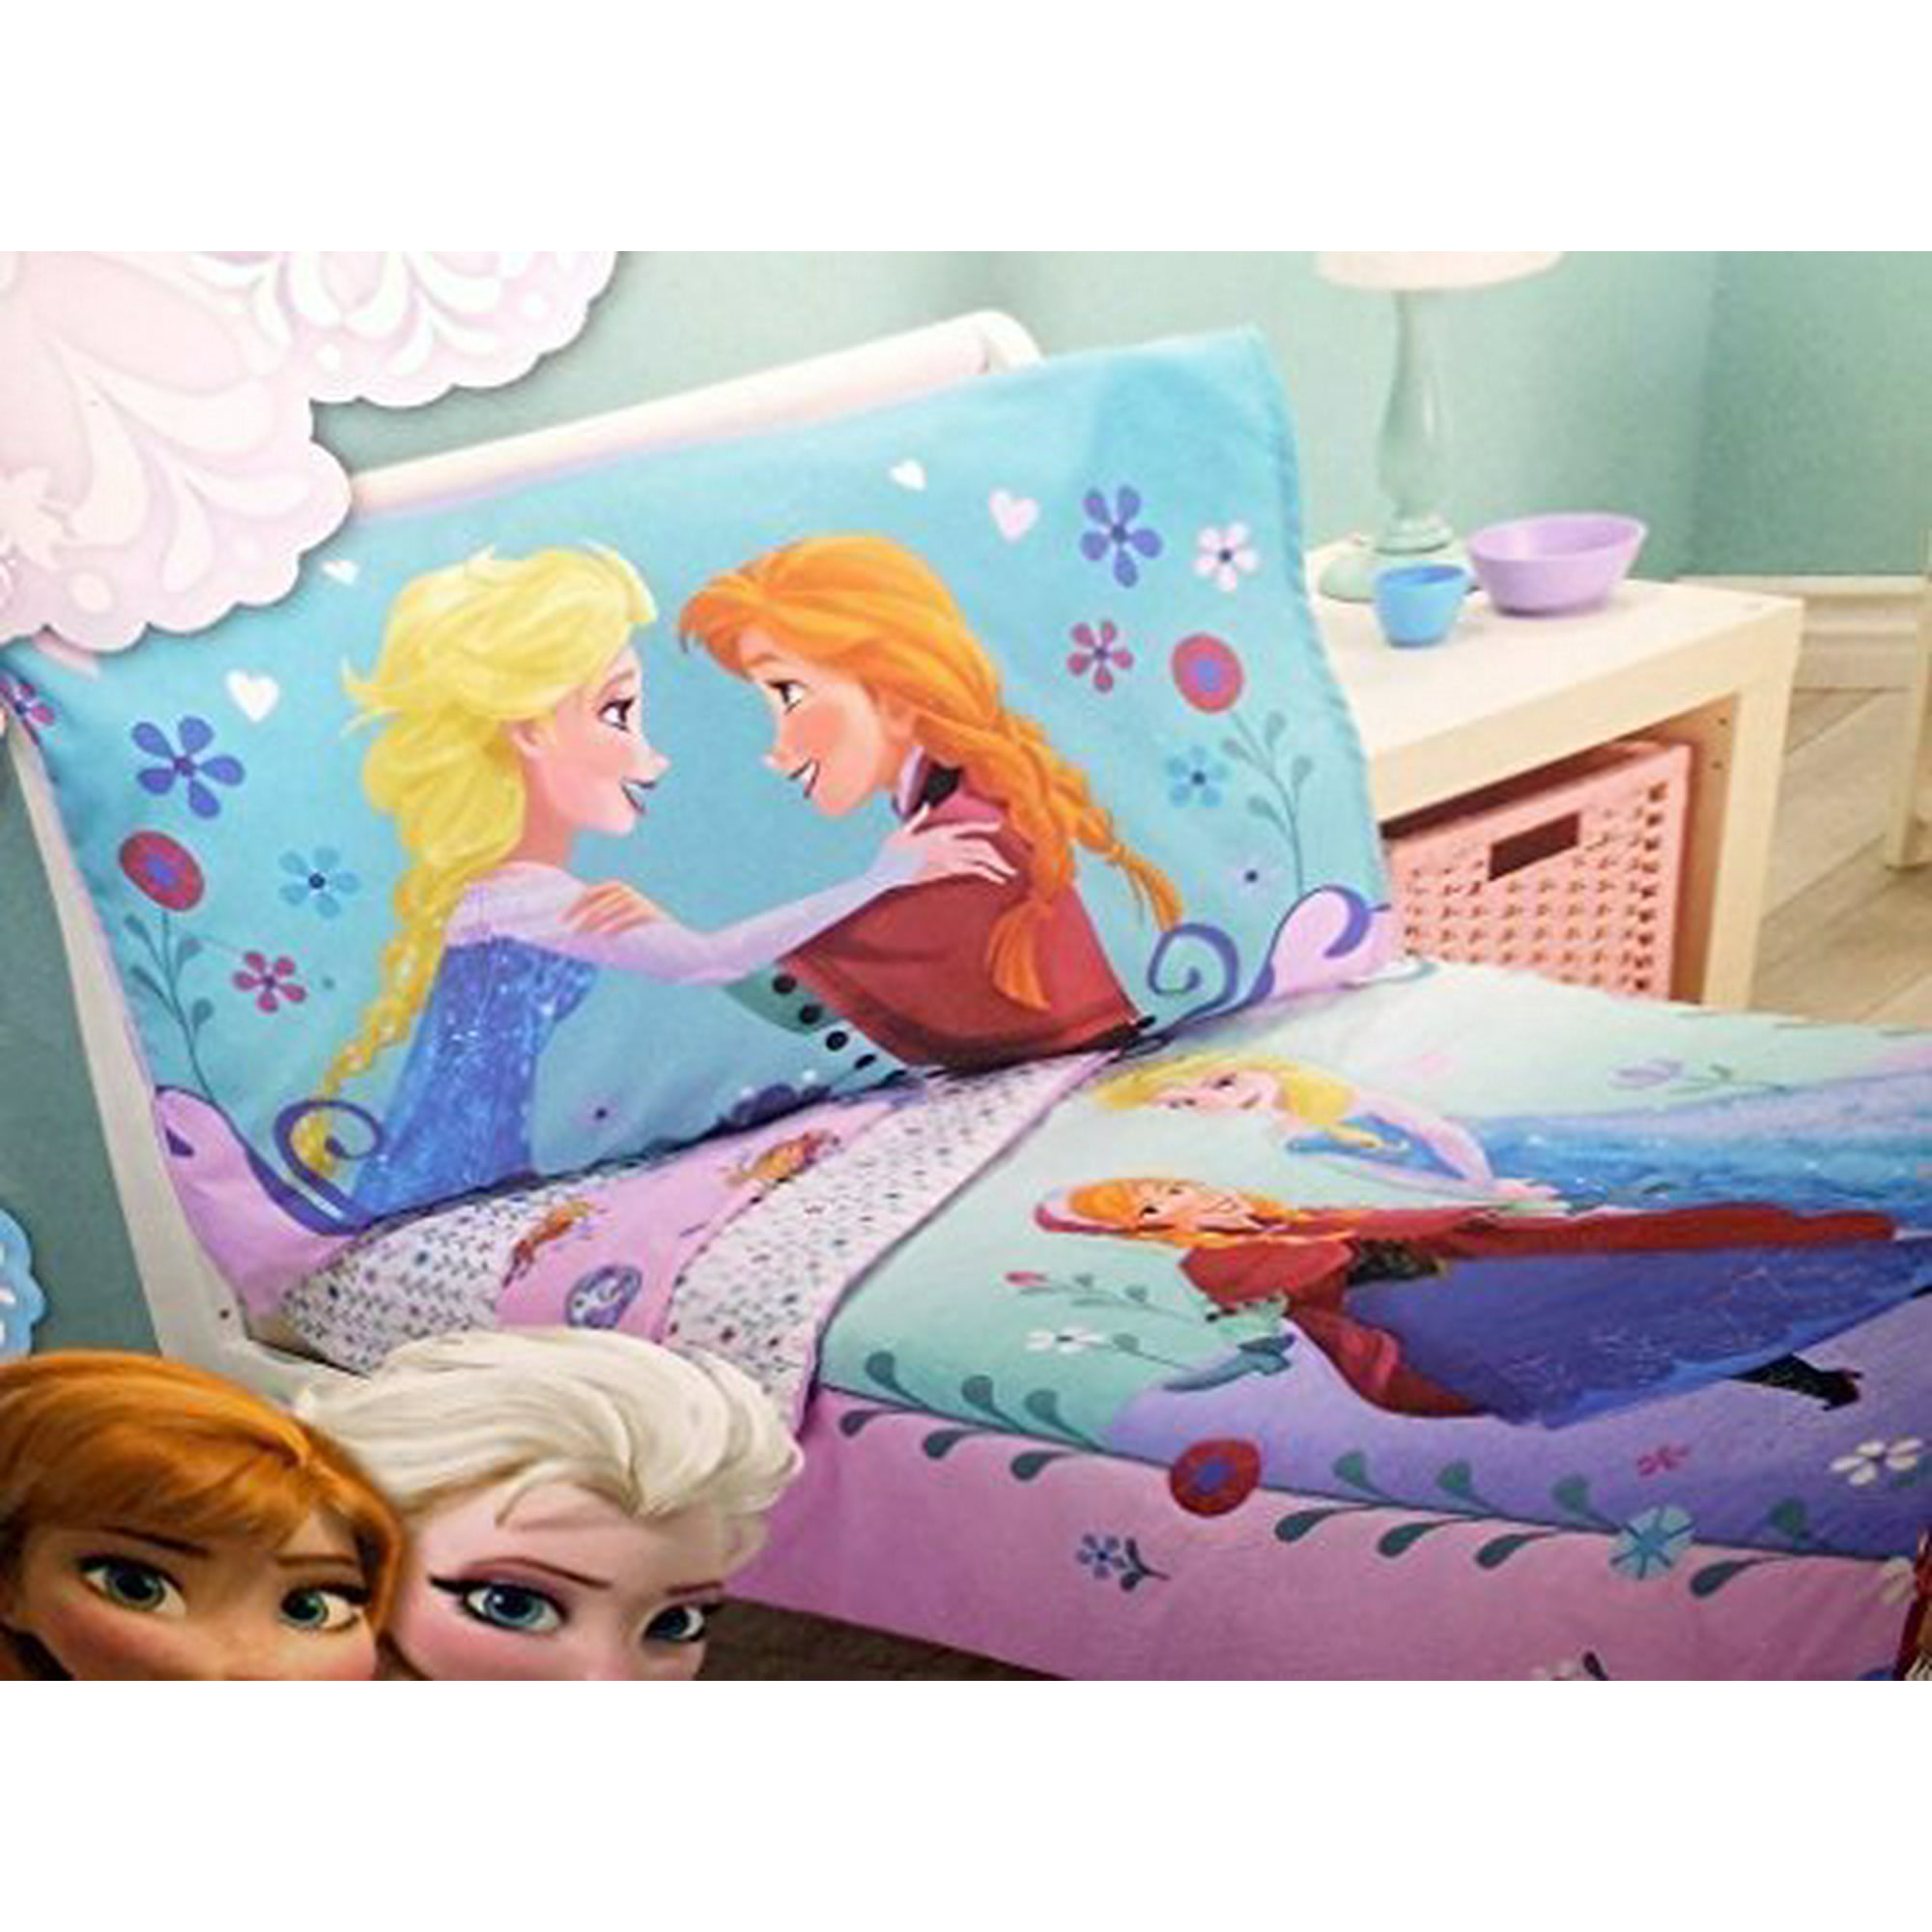 Disney Frozen 4 Piece Toddler Bedding, Can Twin Bedding Fit On A Toddler Bed